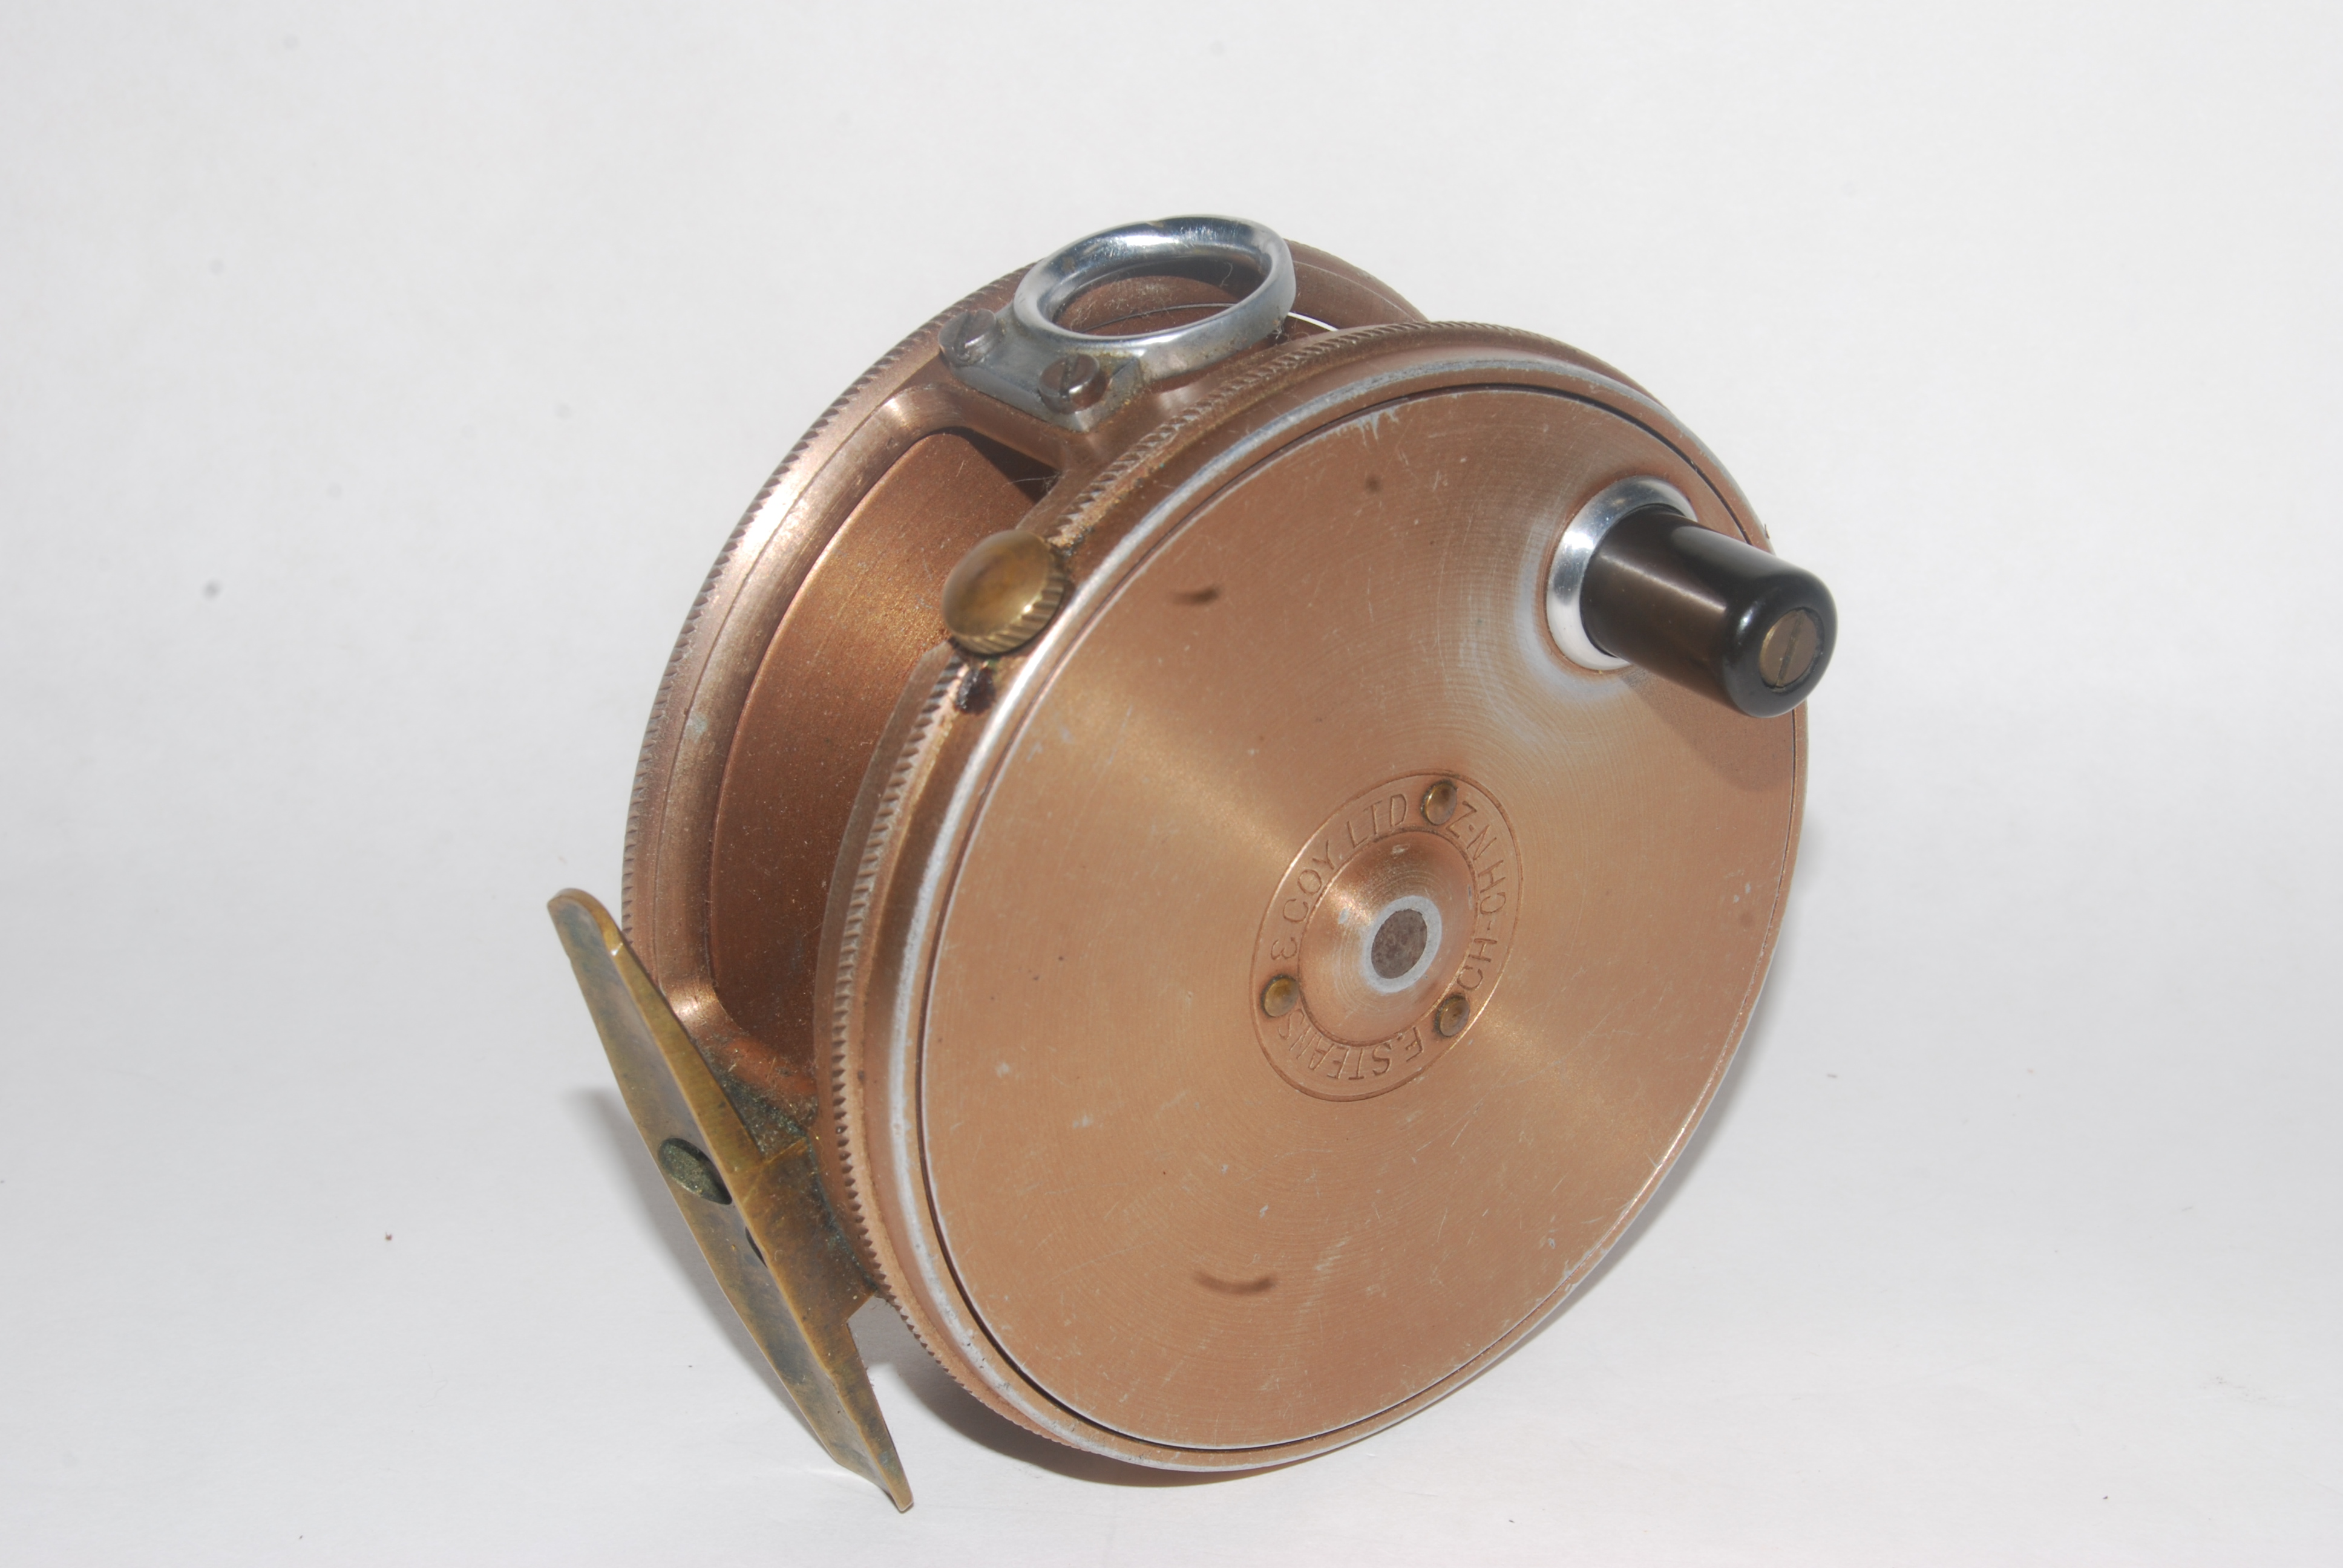 3 7/8 F. STEARNS & COY LMT. CHCH NZ FLY REEL. .[PERFECT- Type] 9